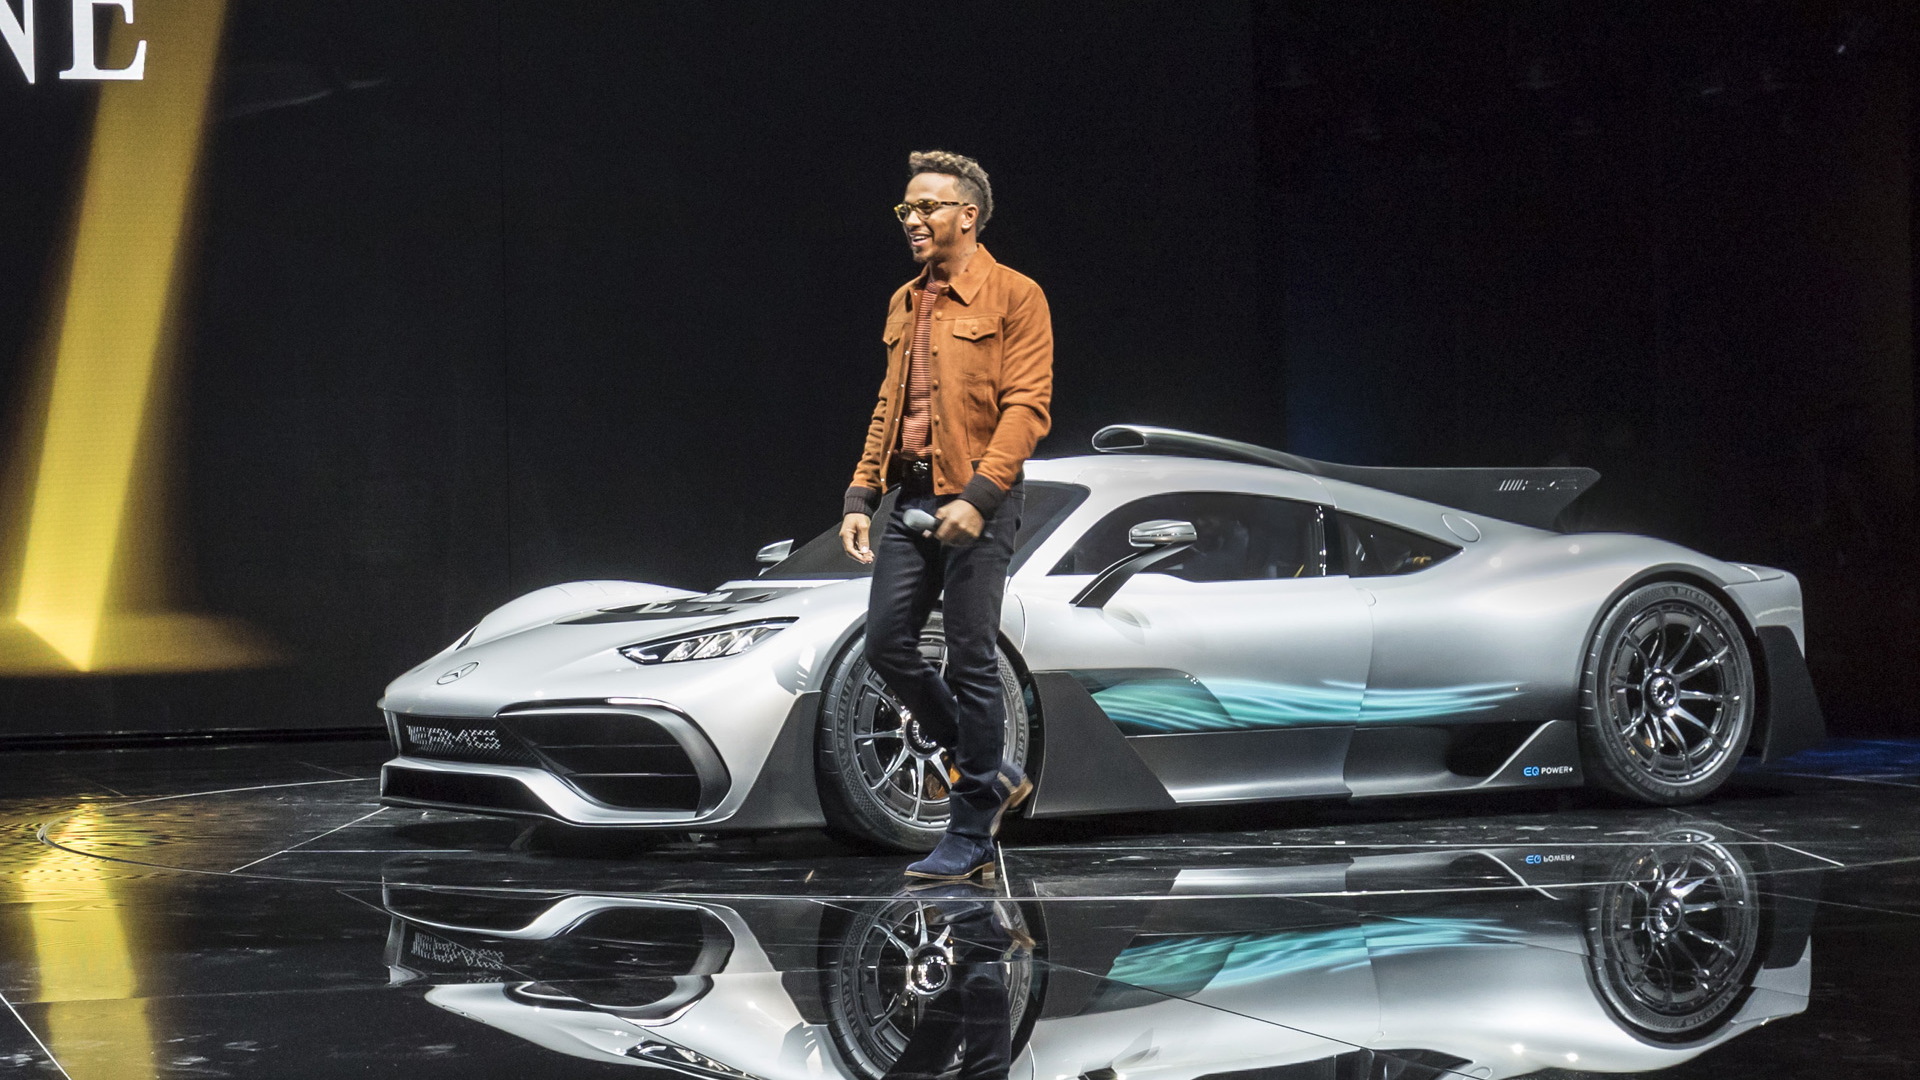 Lewis Hamilton introduces the Mercedes-AMG Project One at the 2017 Frankfurt Motor Show